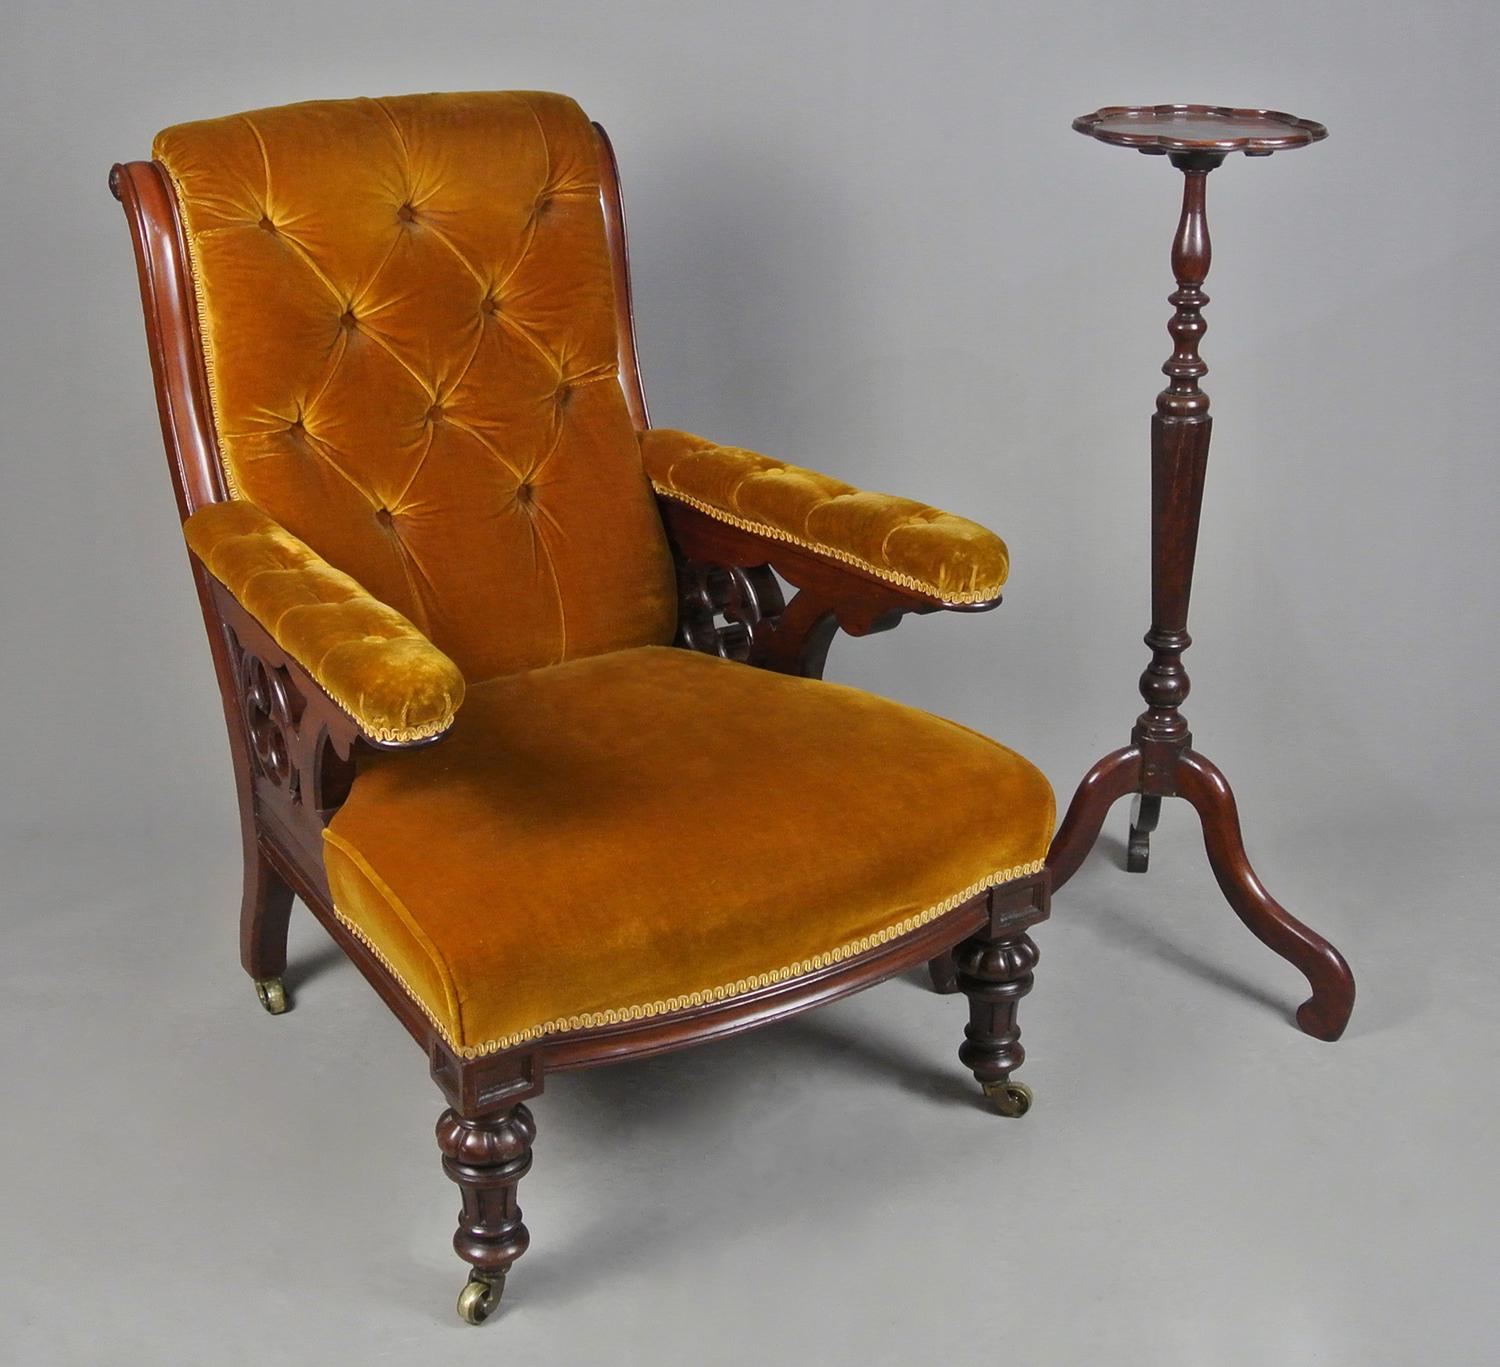 A very attractive and comfortable fireside chair of exceptional quality in solid mahogany and carved with substantial gothic trefoils which form the arm supports.  Really beautiful large and well turned front legs set on original solid brass